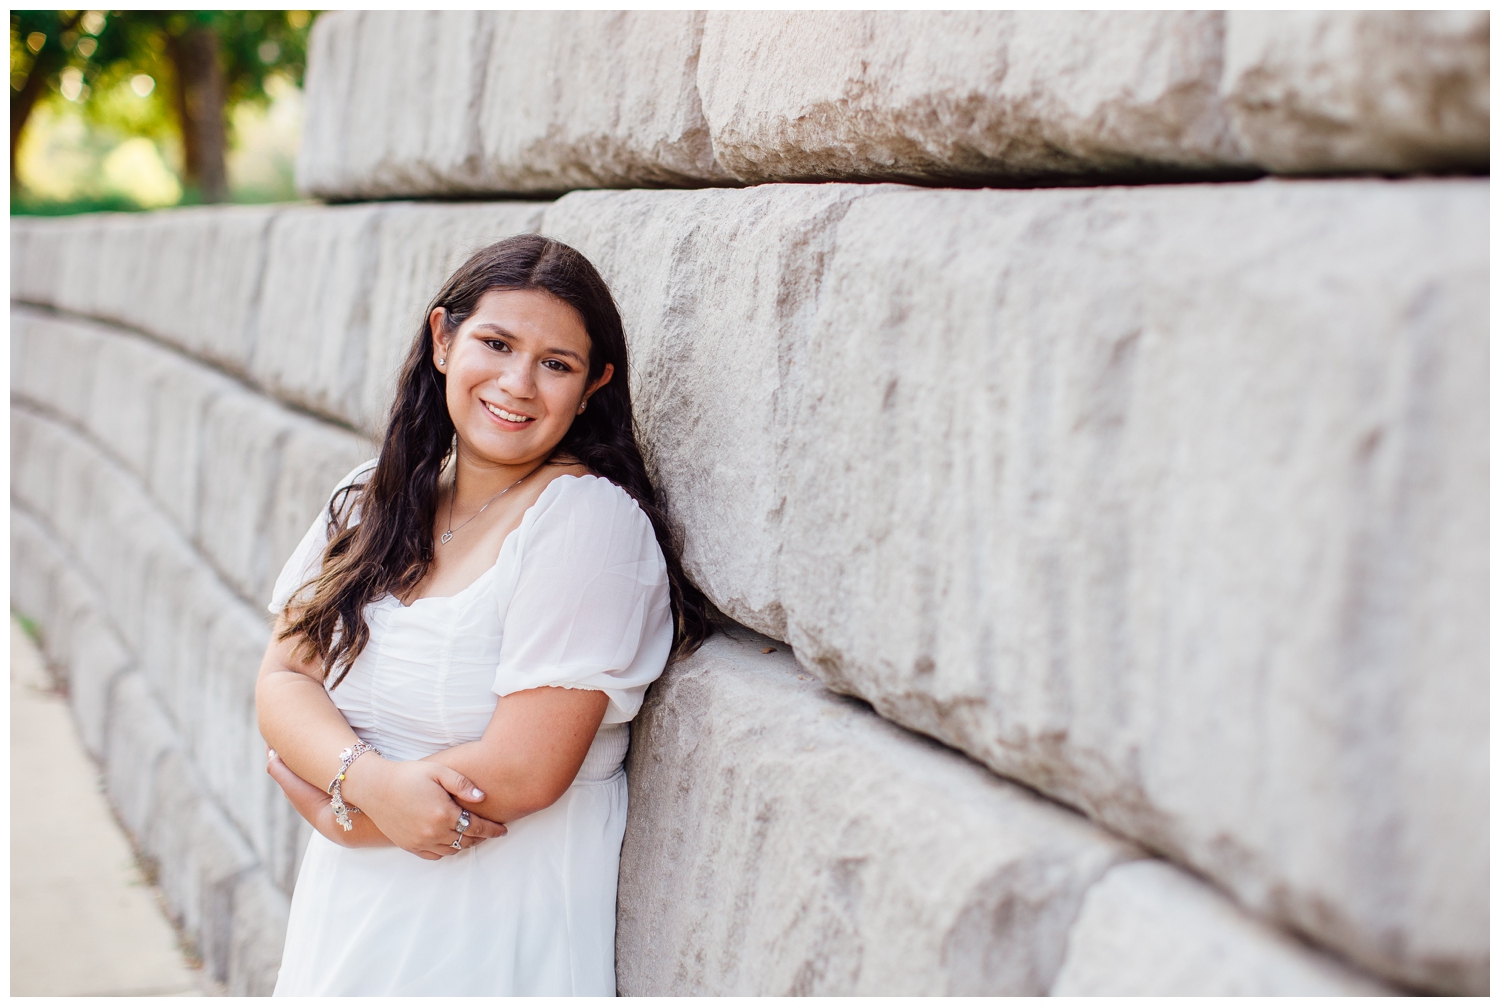 girl in white dress smiling with arms crossed outdoors for Senior Photos in Houston